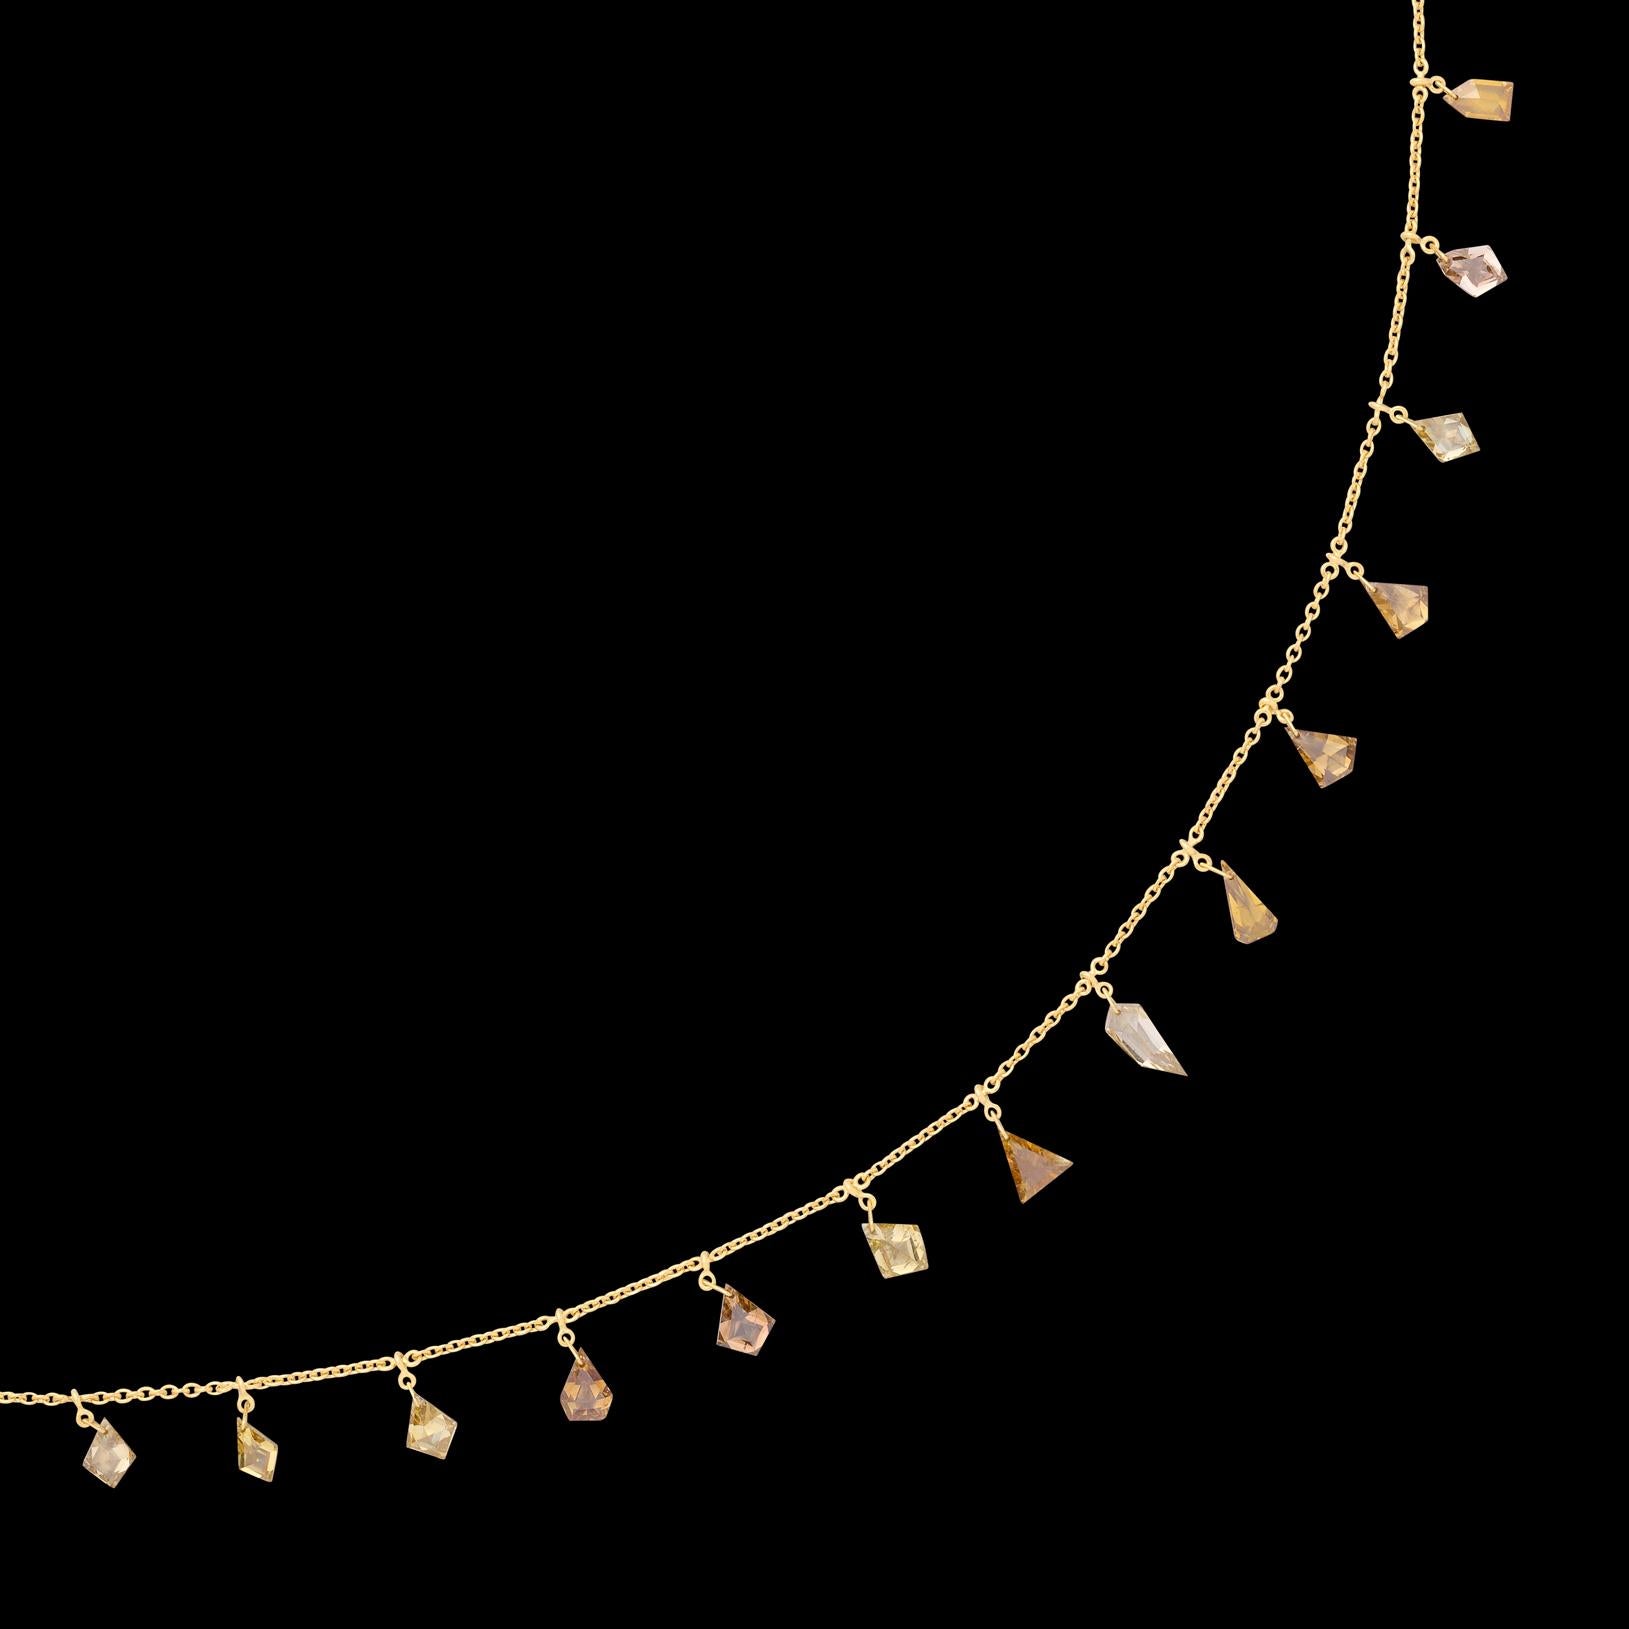 A true original! This 18 karat yellow gold necklace features a combination of 17 Yellow, Orange, Champagne and White Diamonds of varying cuts (kites, triangles, diamond cuts etc) weighing a total of 4.40 carats (averaging VS-SI), delicately dangling